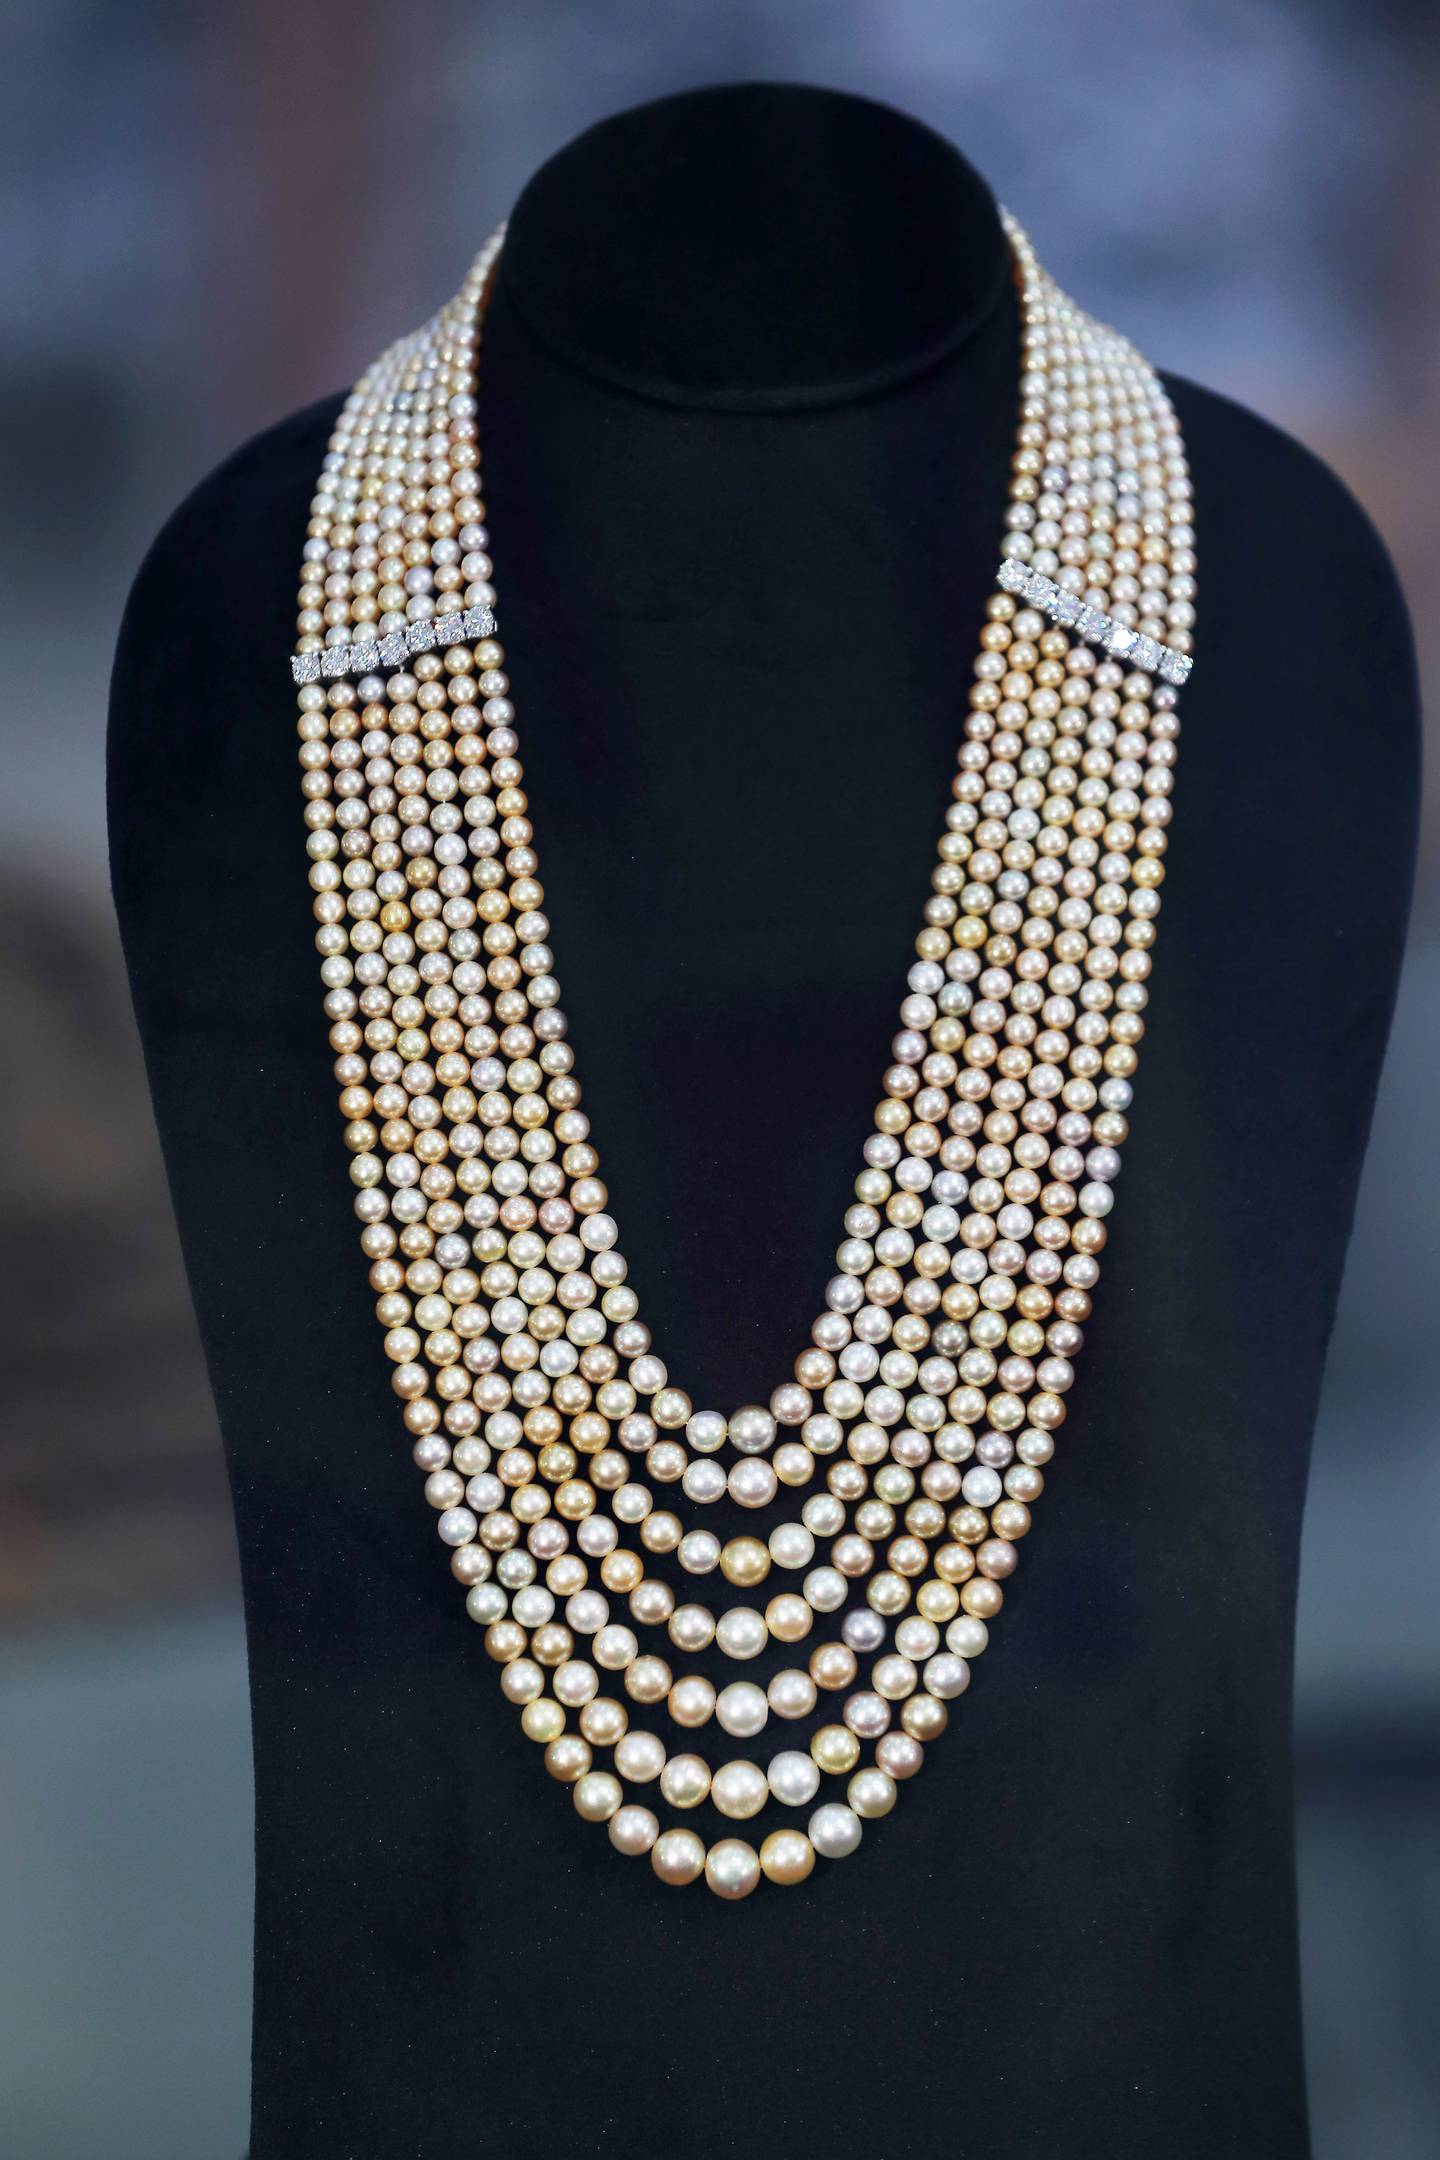 Pearl jewellery from Bahrain on display at the Bahrain pavilion at Expo 2020 in Dubai. Pearls from the country have always been highly regarded. Pawan Singh / The National